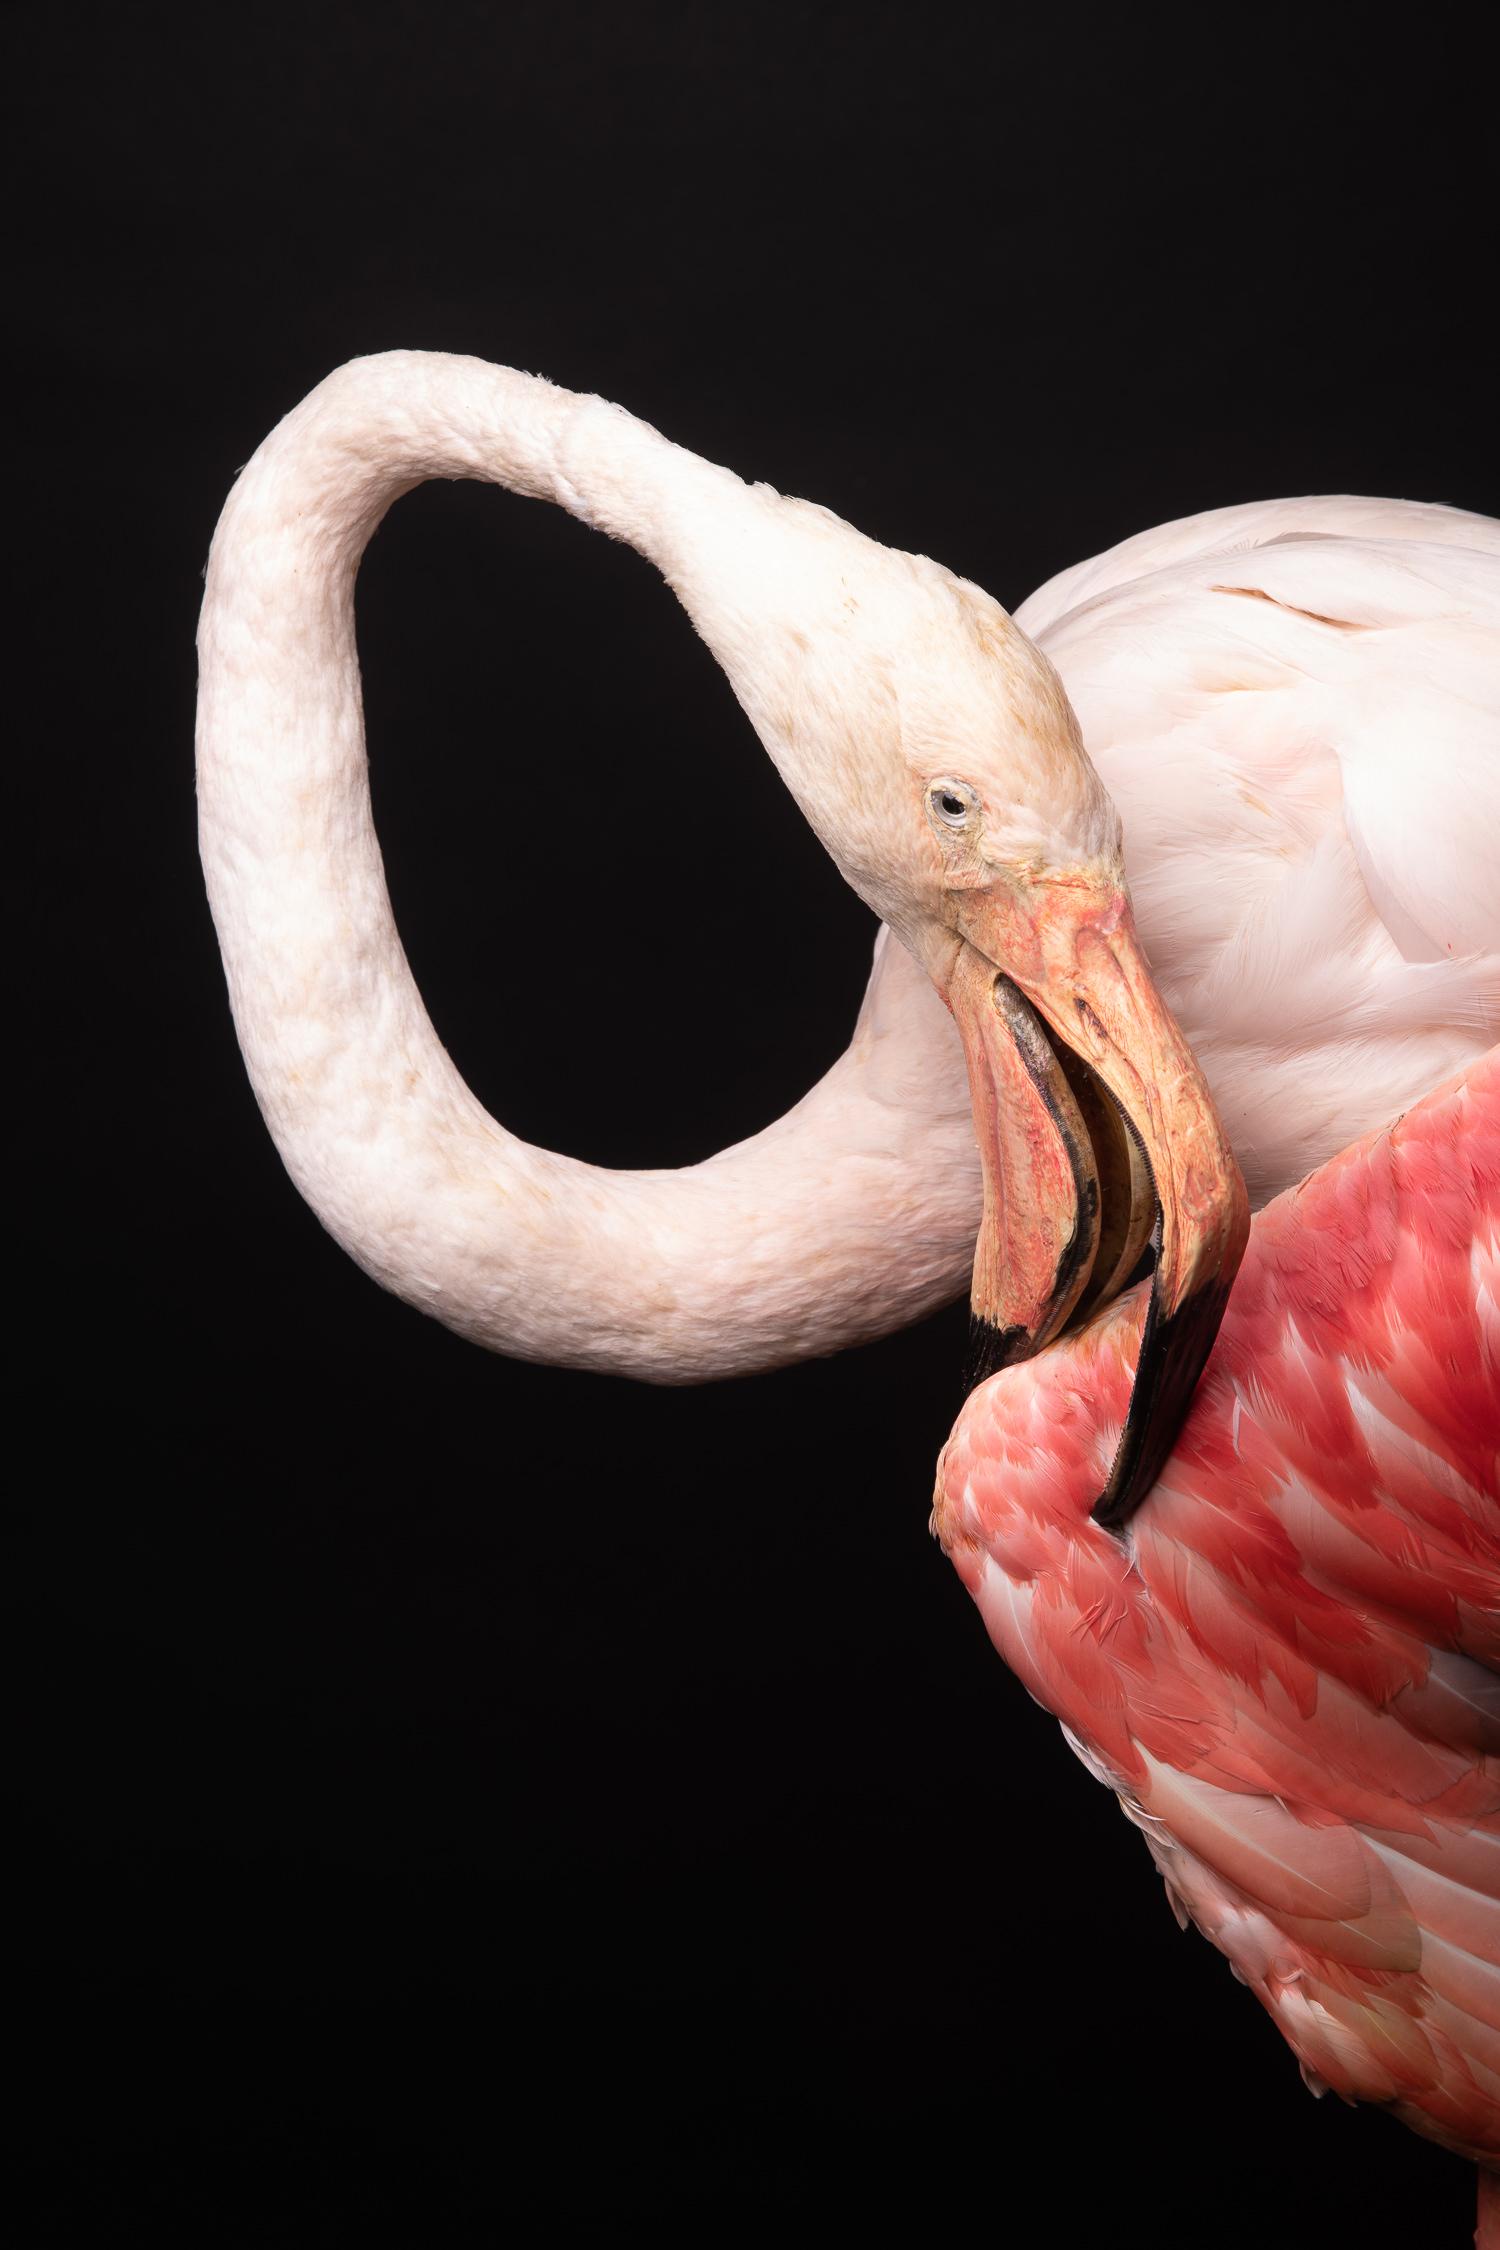 Taxidermy of two small flamingos, one lying on the ground, the other standing on both legs. Their feathers are light pink, while their beaks are a darker shade of color. The flamingo standing up has dark pink and black feather as wings. Both of them